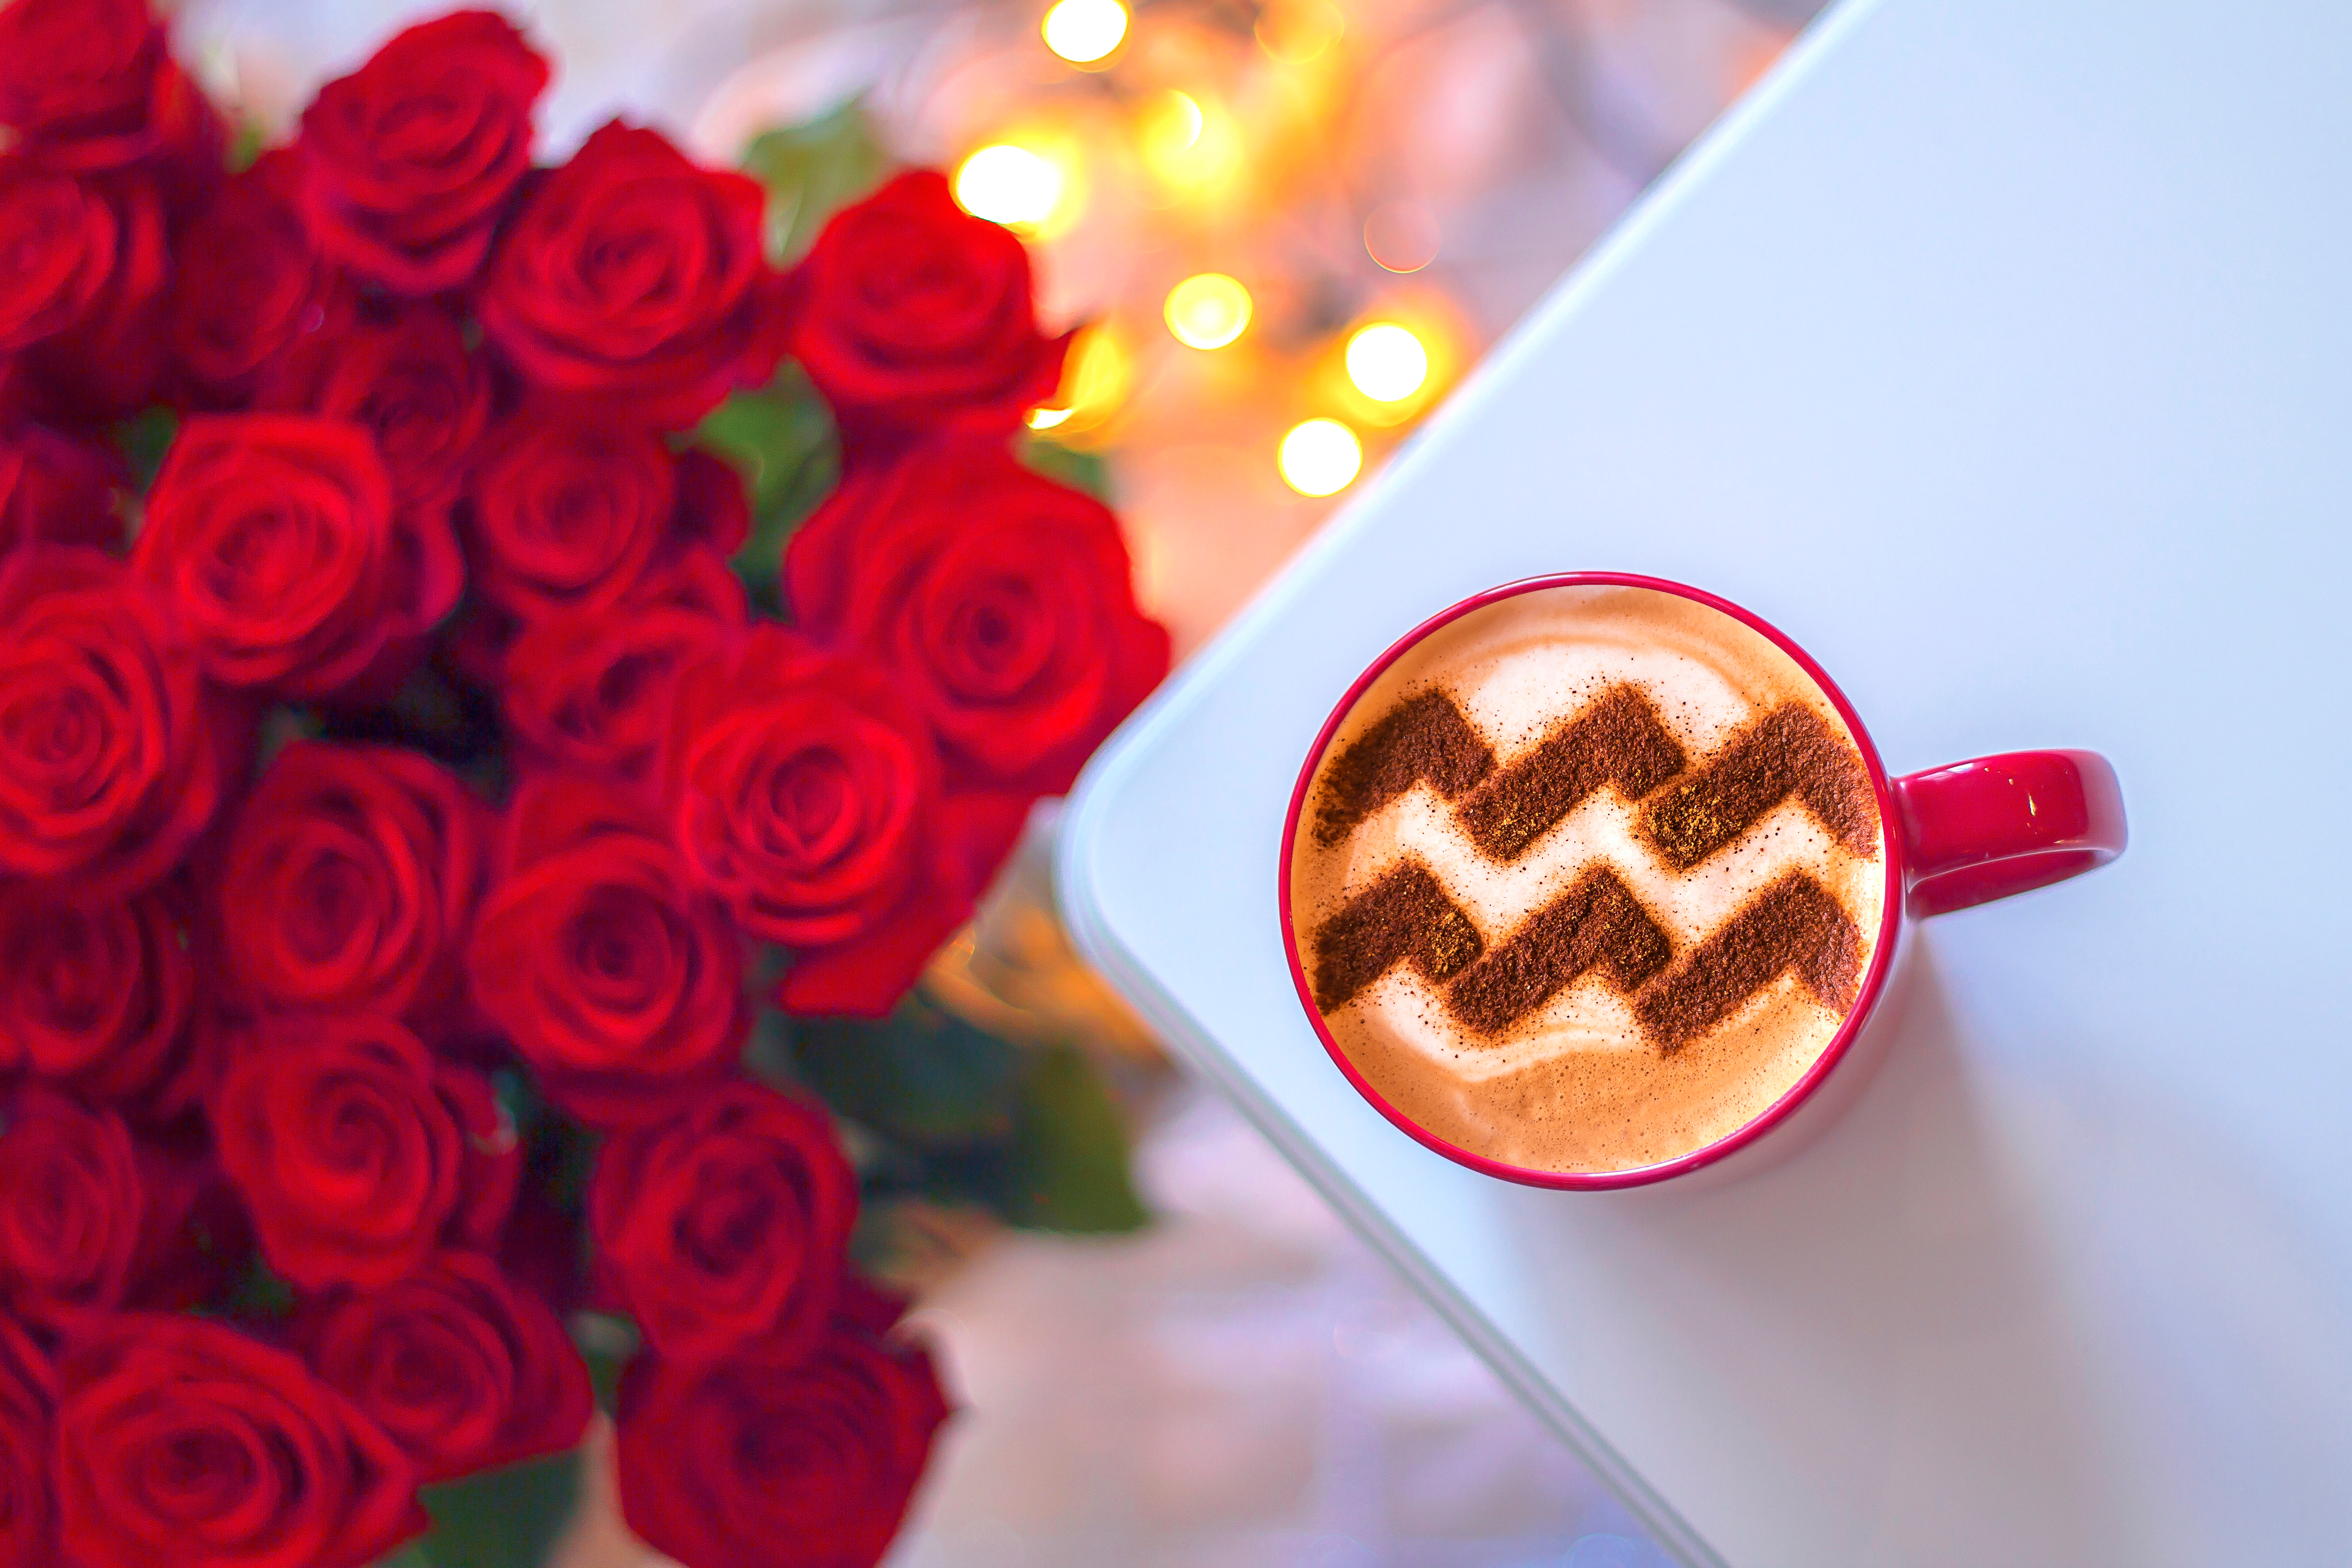 An image of the Aquarius sign in a coffee next to a bunch of red roses